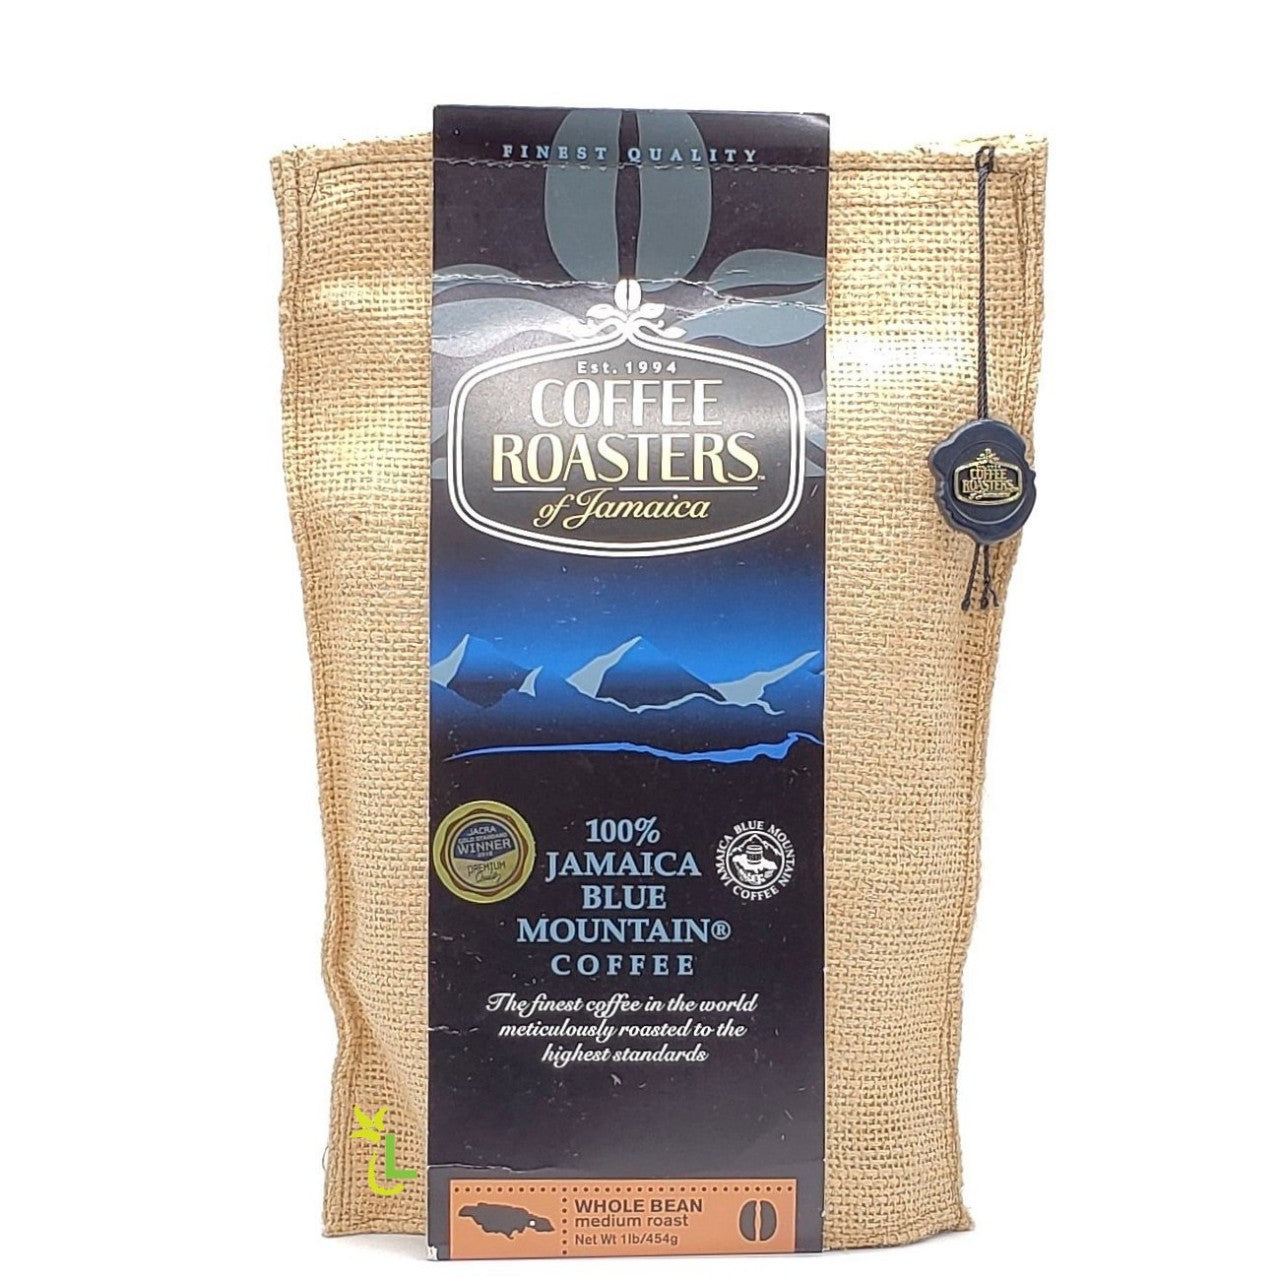 Coffee Roasters of Jamaica - 100% Jamaica Blue Mountain Whole Beans 16oz (FREE 2 DAY  SHIPPING)